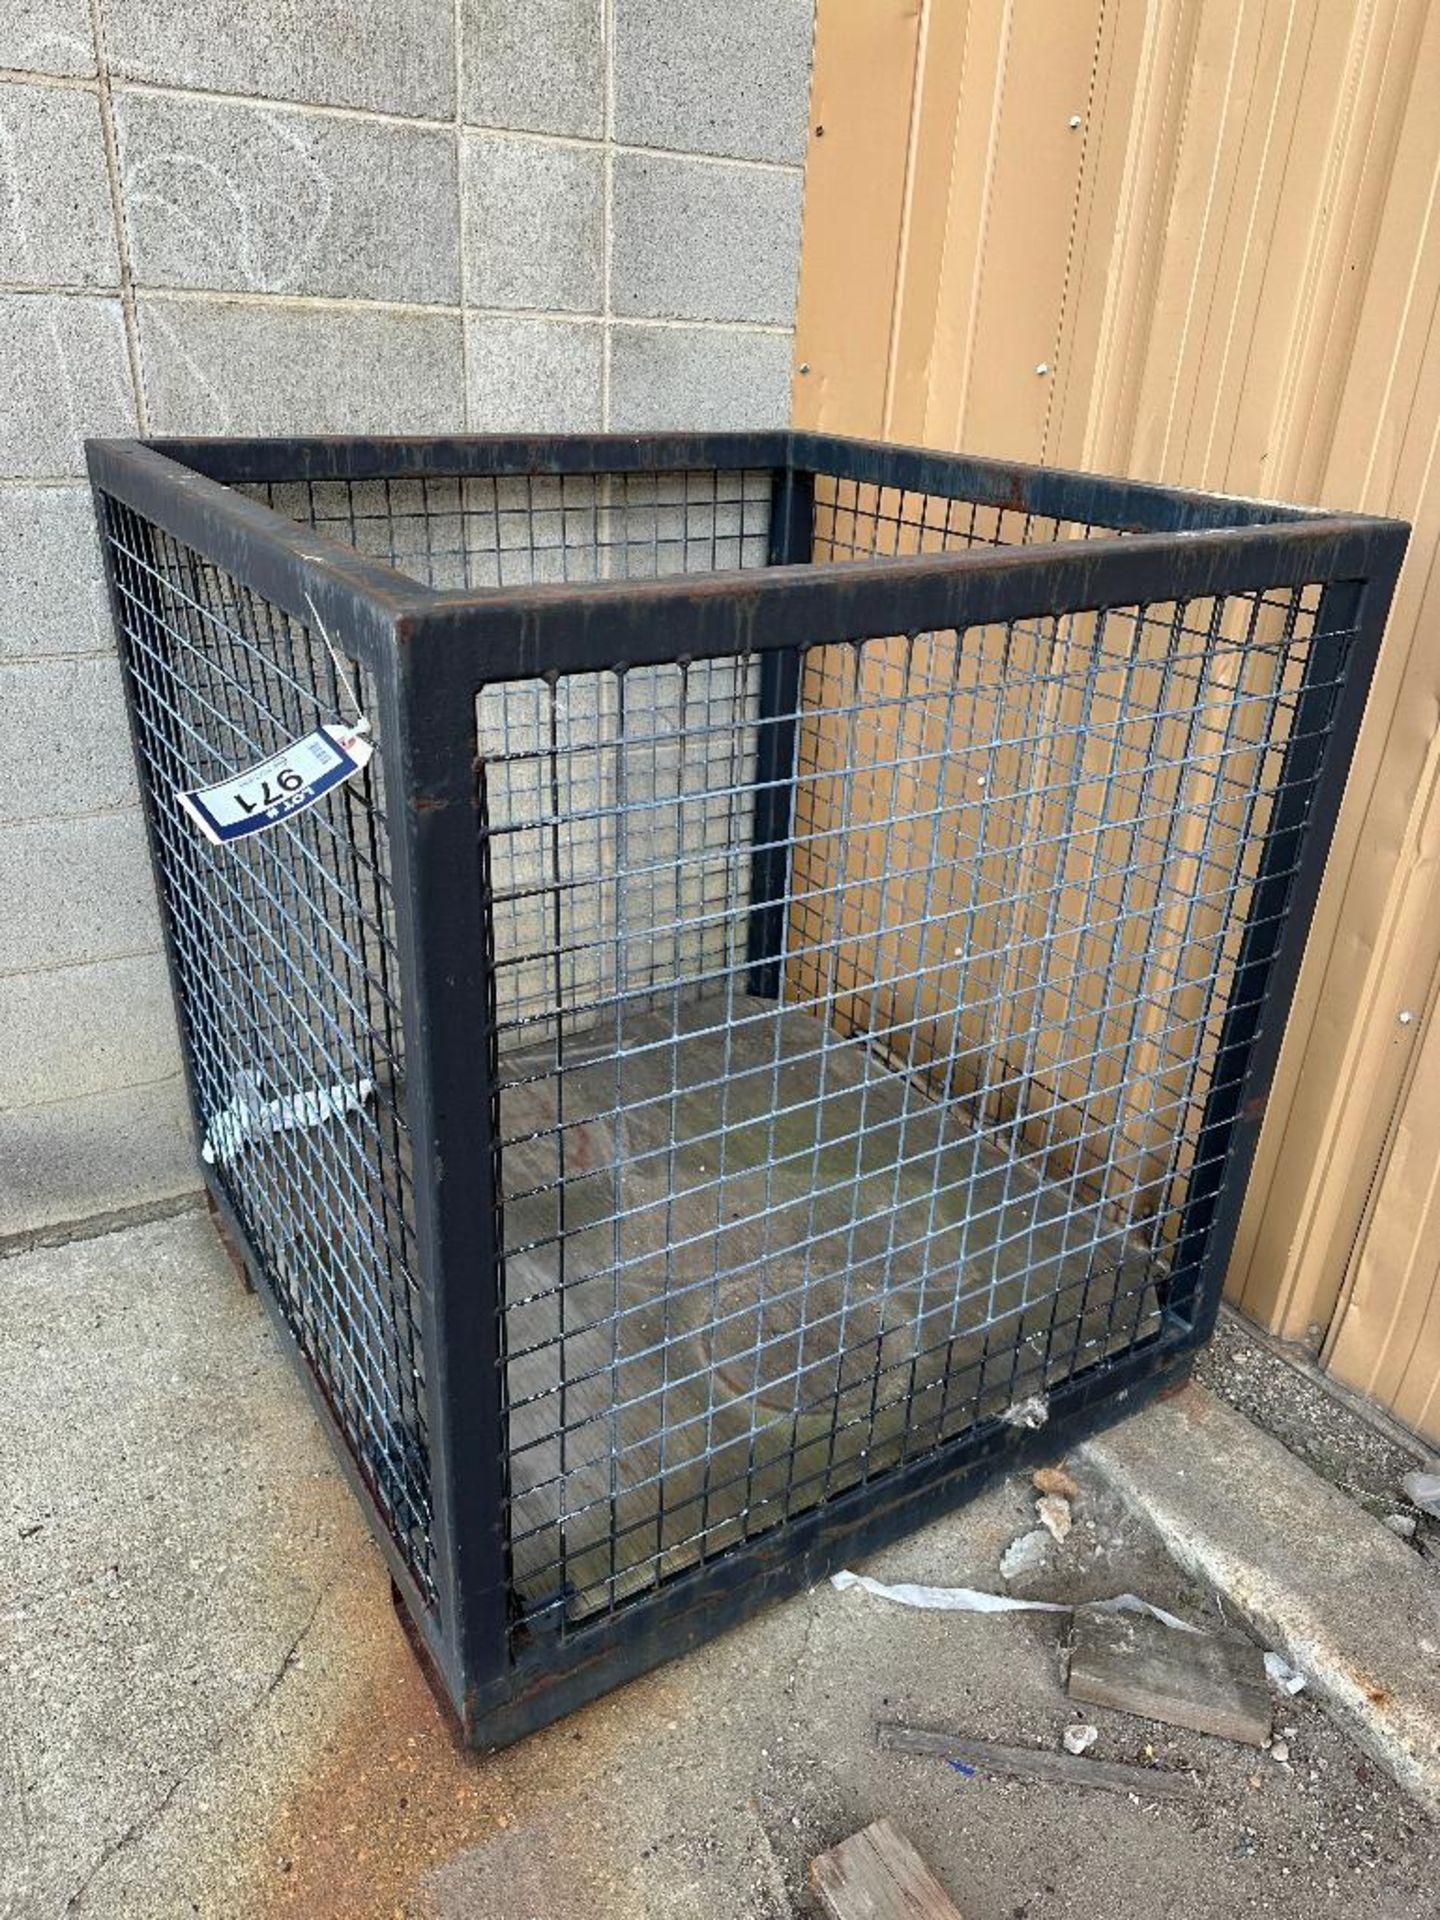 39" X 39" Steel Crate - Image 3 of 3